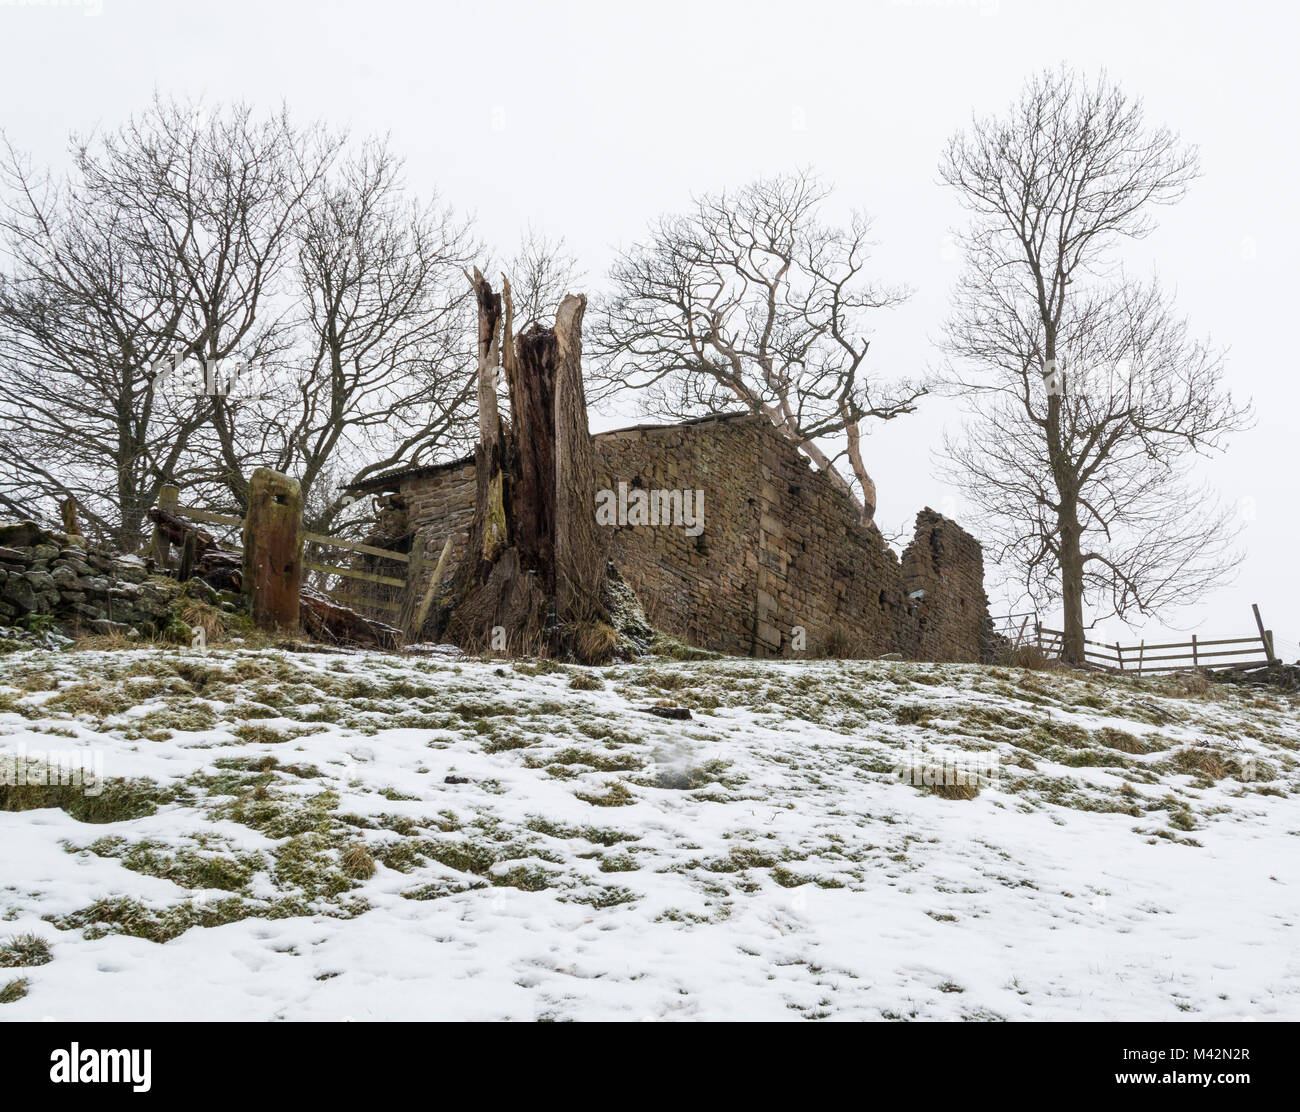 An image of a derelict building taken after a snow shower in Derbyshire, England, UK Stock Photo